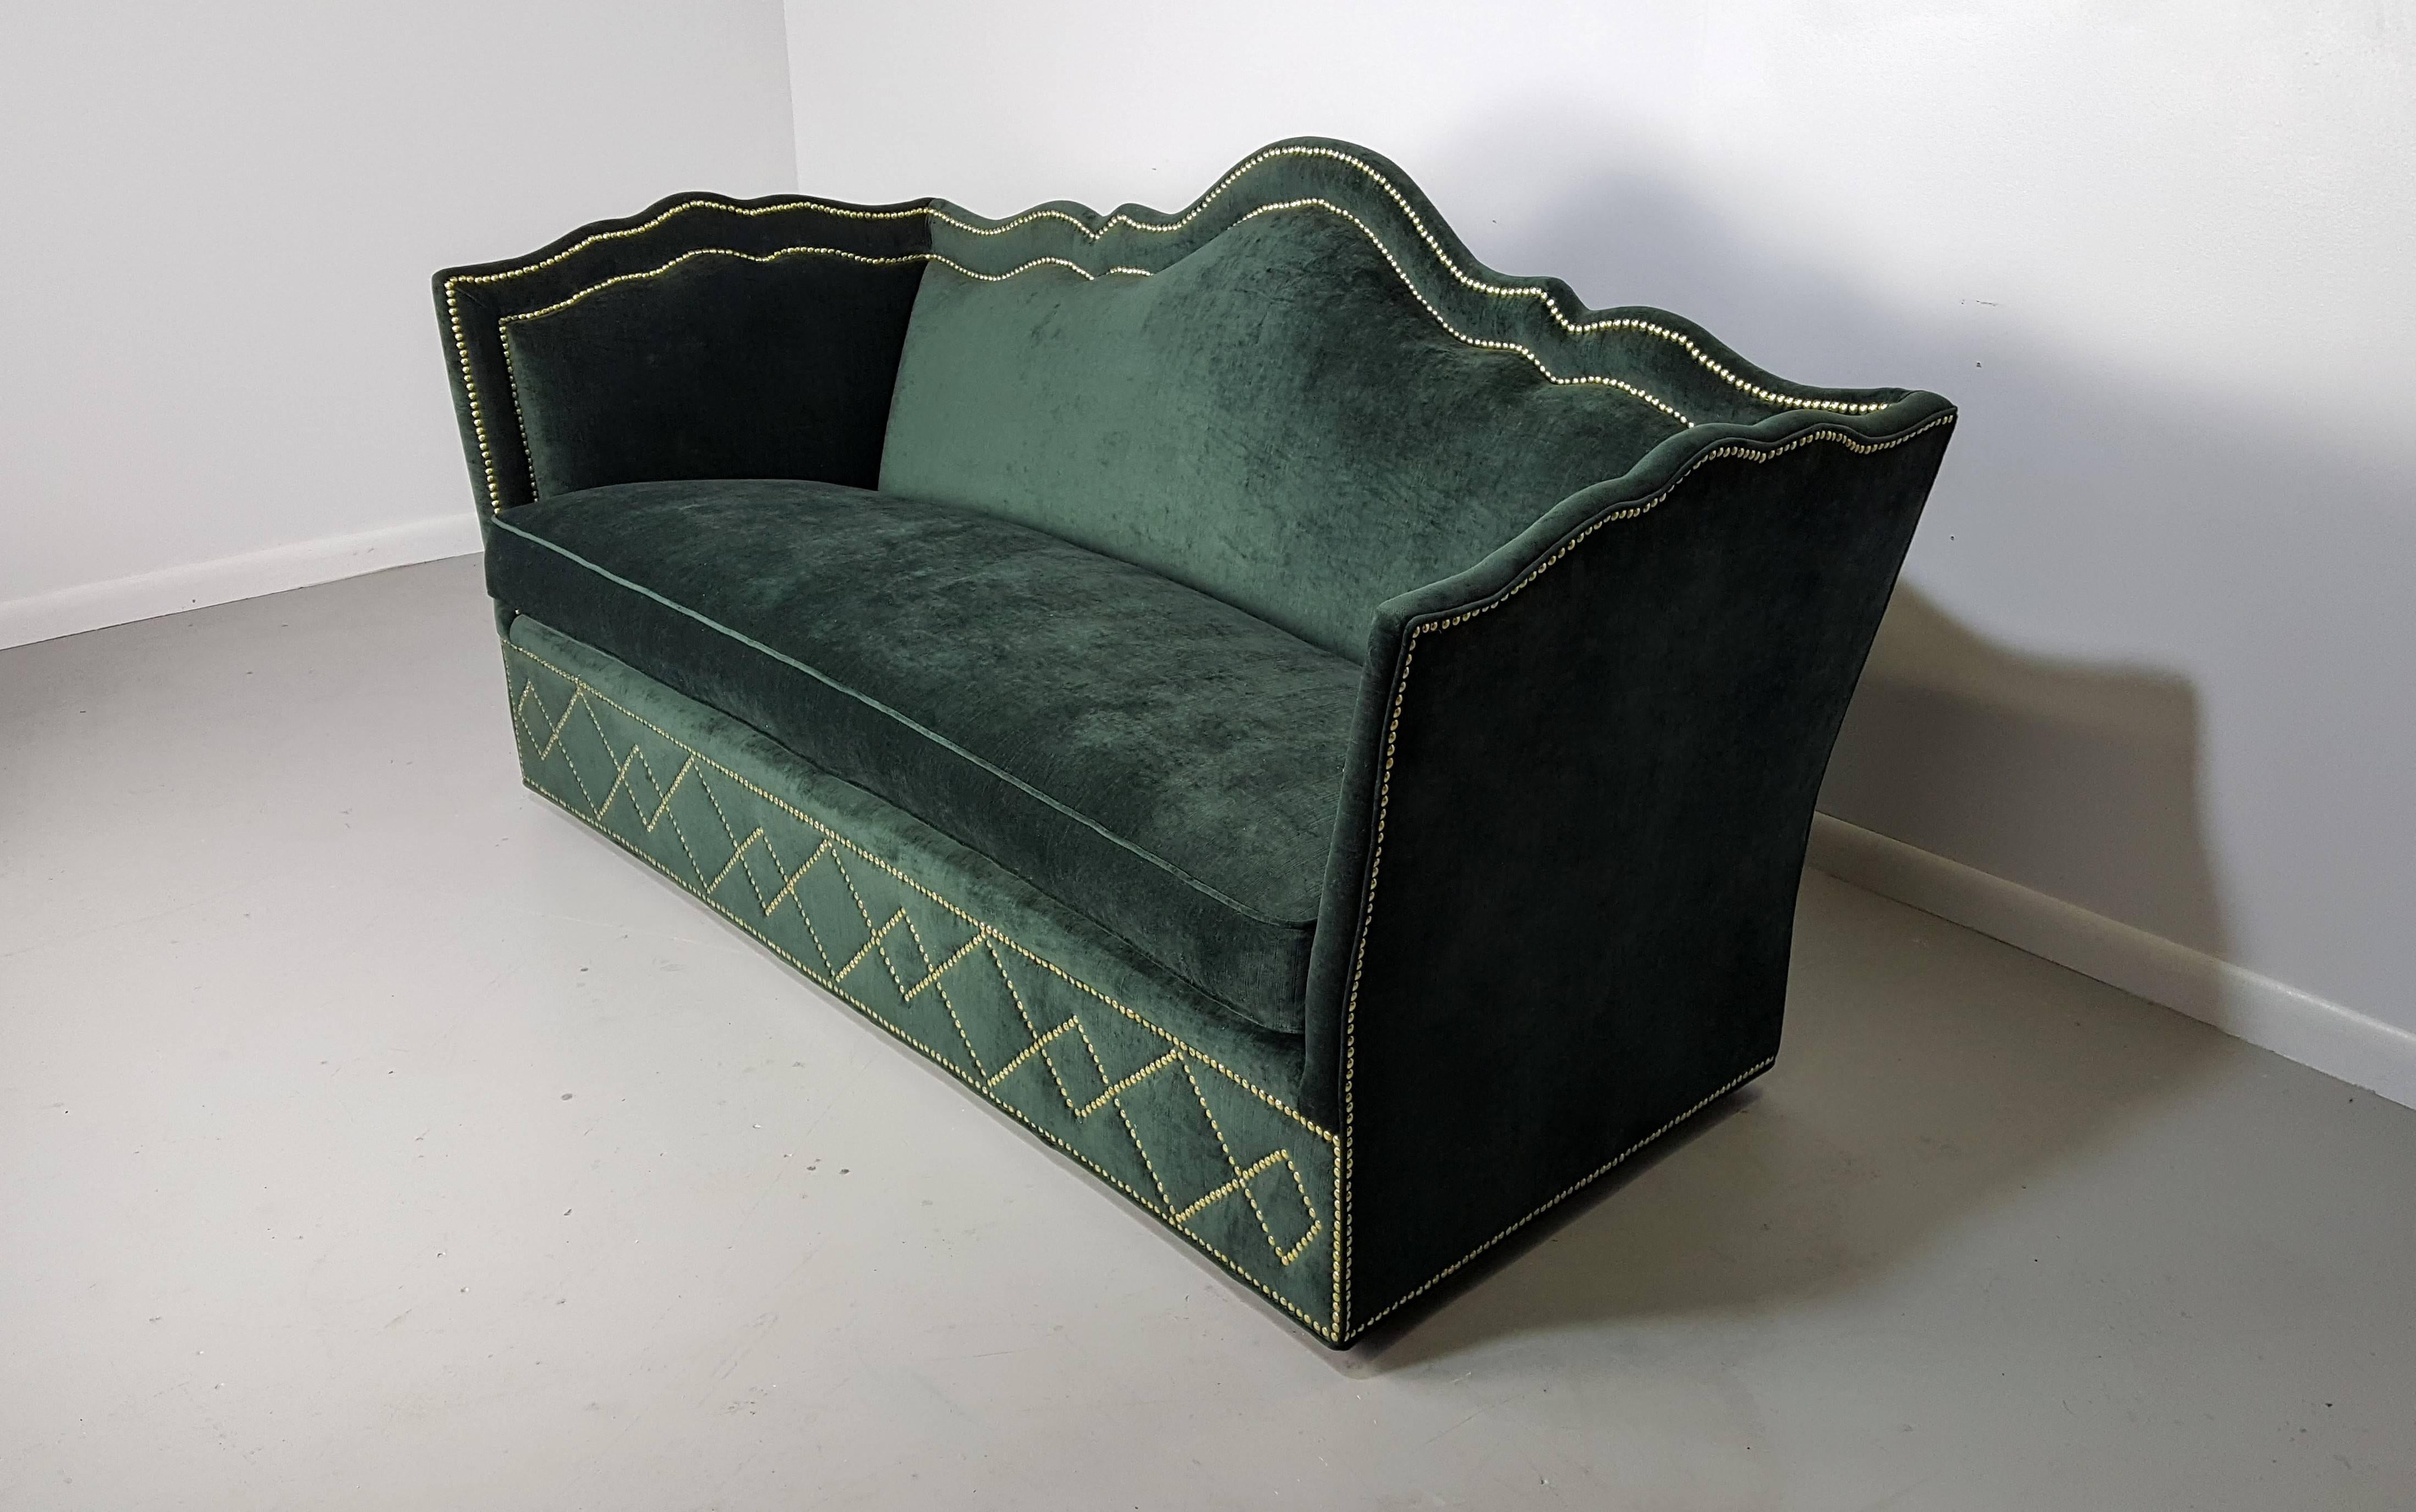 Incredibly luxurious sofa with nailhead detail by Baker Furniture, 1960s. Such a delightful Hollywood Regency piece. Very comfortable and of the highest quality. Newly refinished and in excellent condition.

See this item in our private NYC